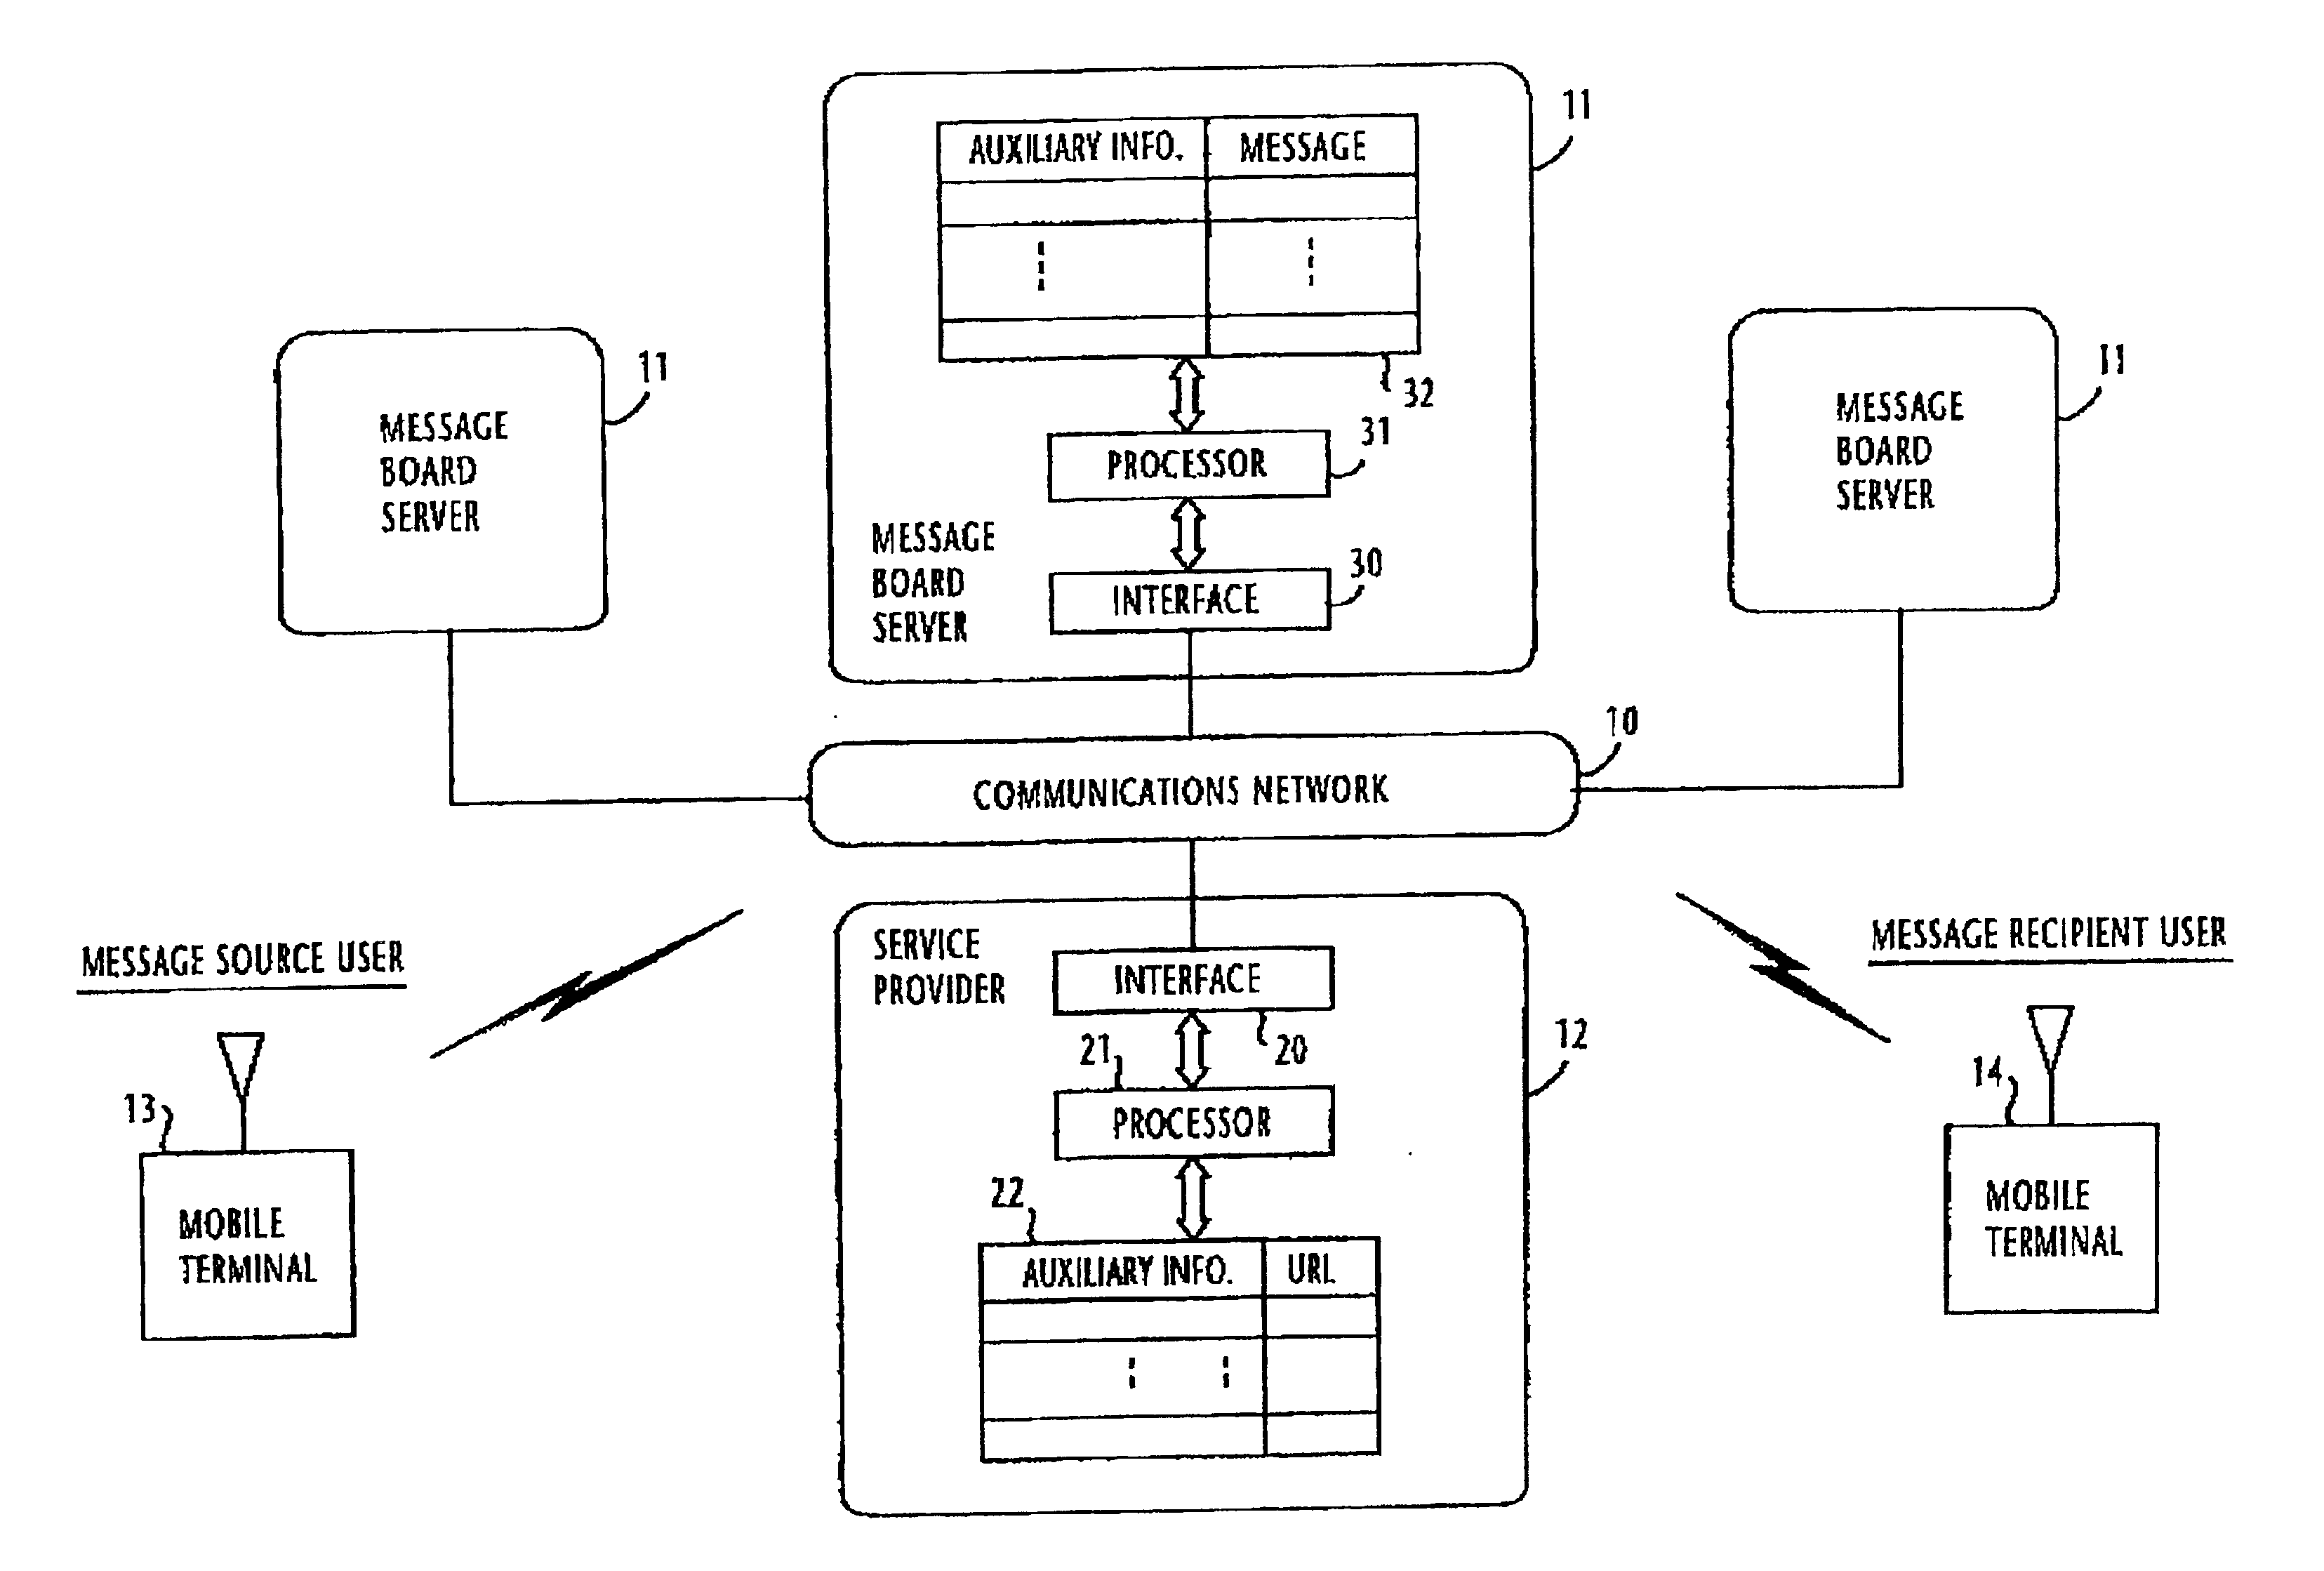 System and method for instantly accessing a message board server